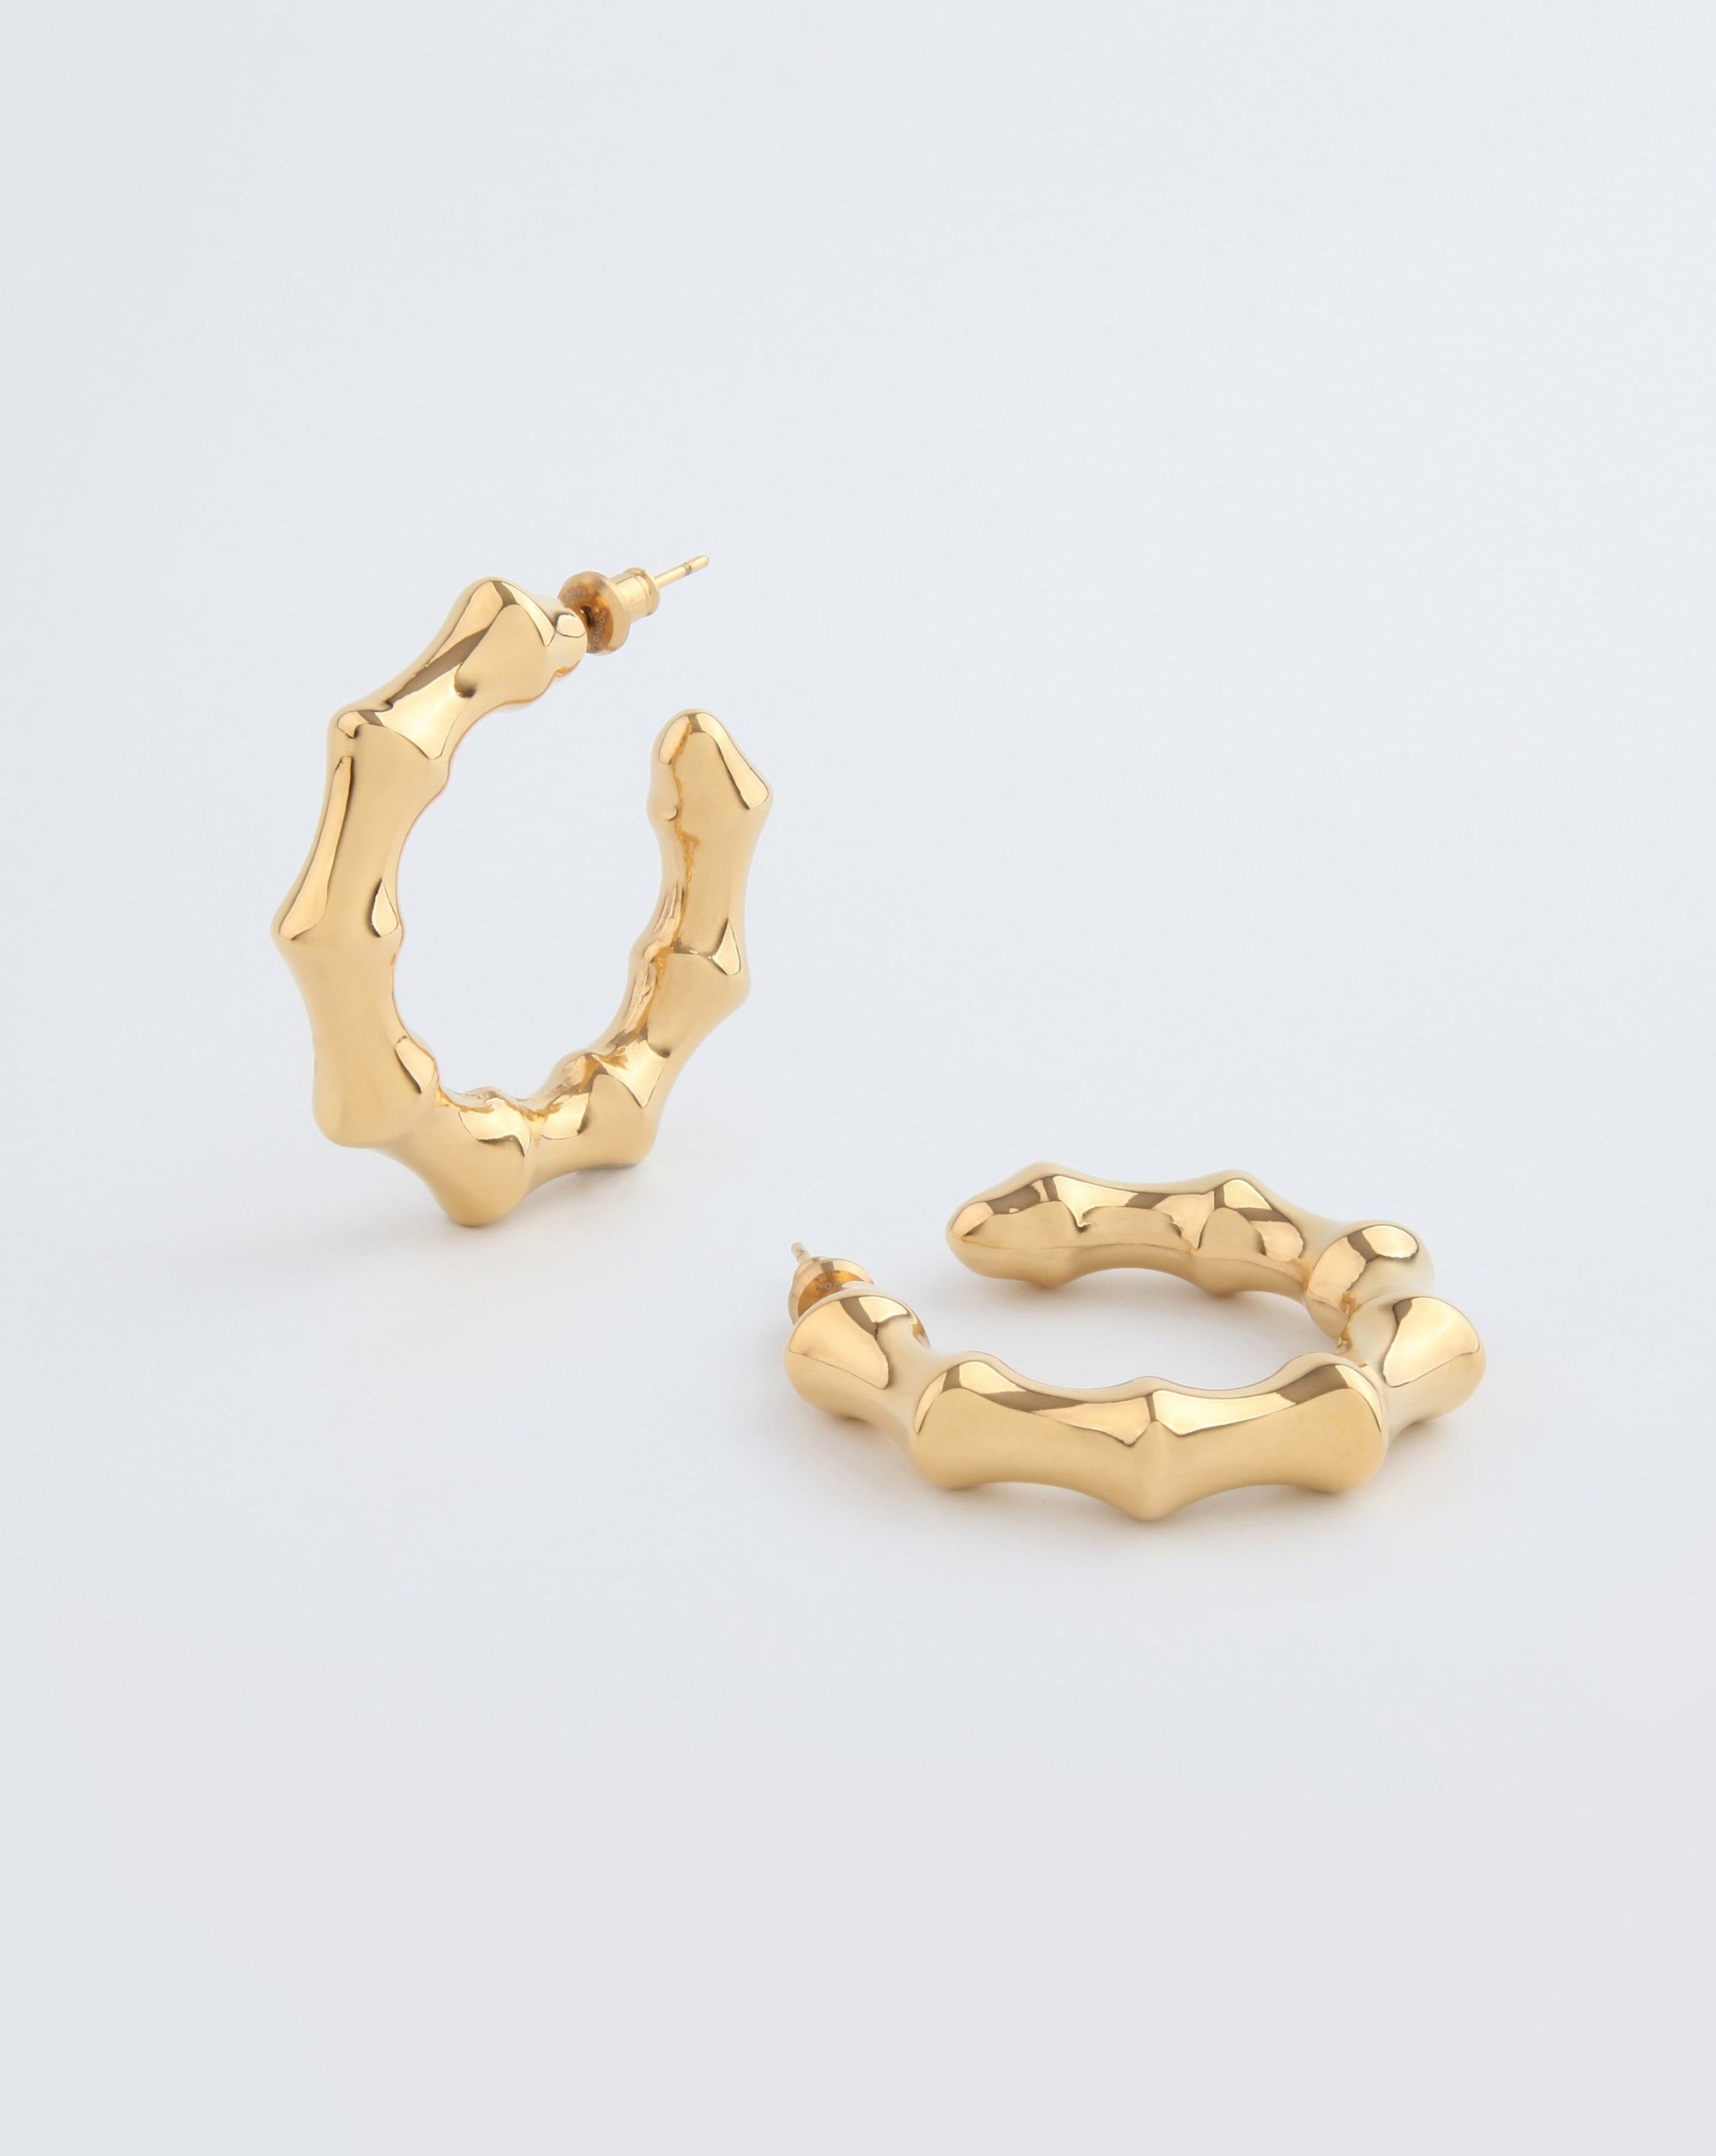 A pair of Bamboo Earrings Gold from For Art&#39;s Sake® with a unique, wavy, and textured design. Featuring a shiny finish and post-back fastening, they are displayed on a plain white background, with one standing upright and the other lying flat.